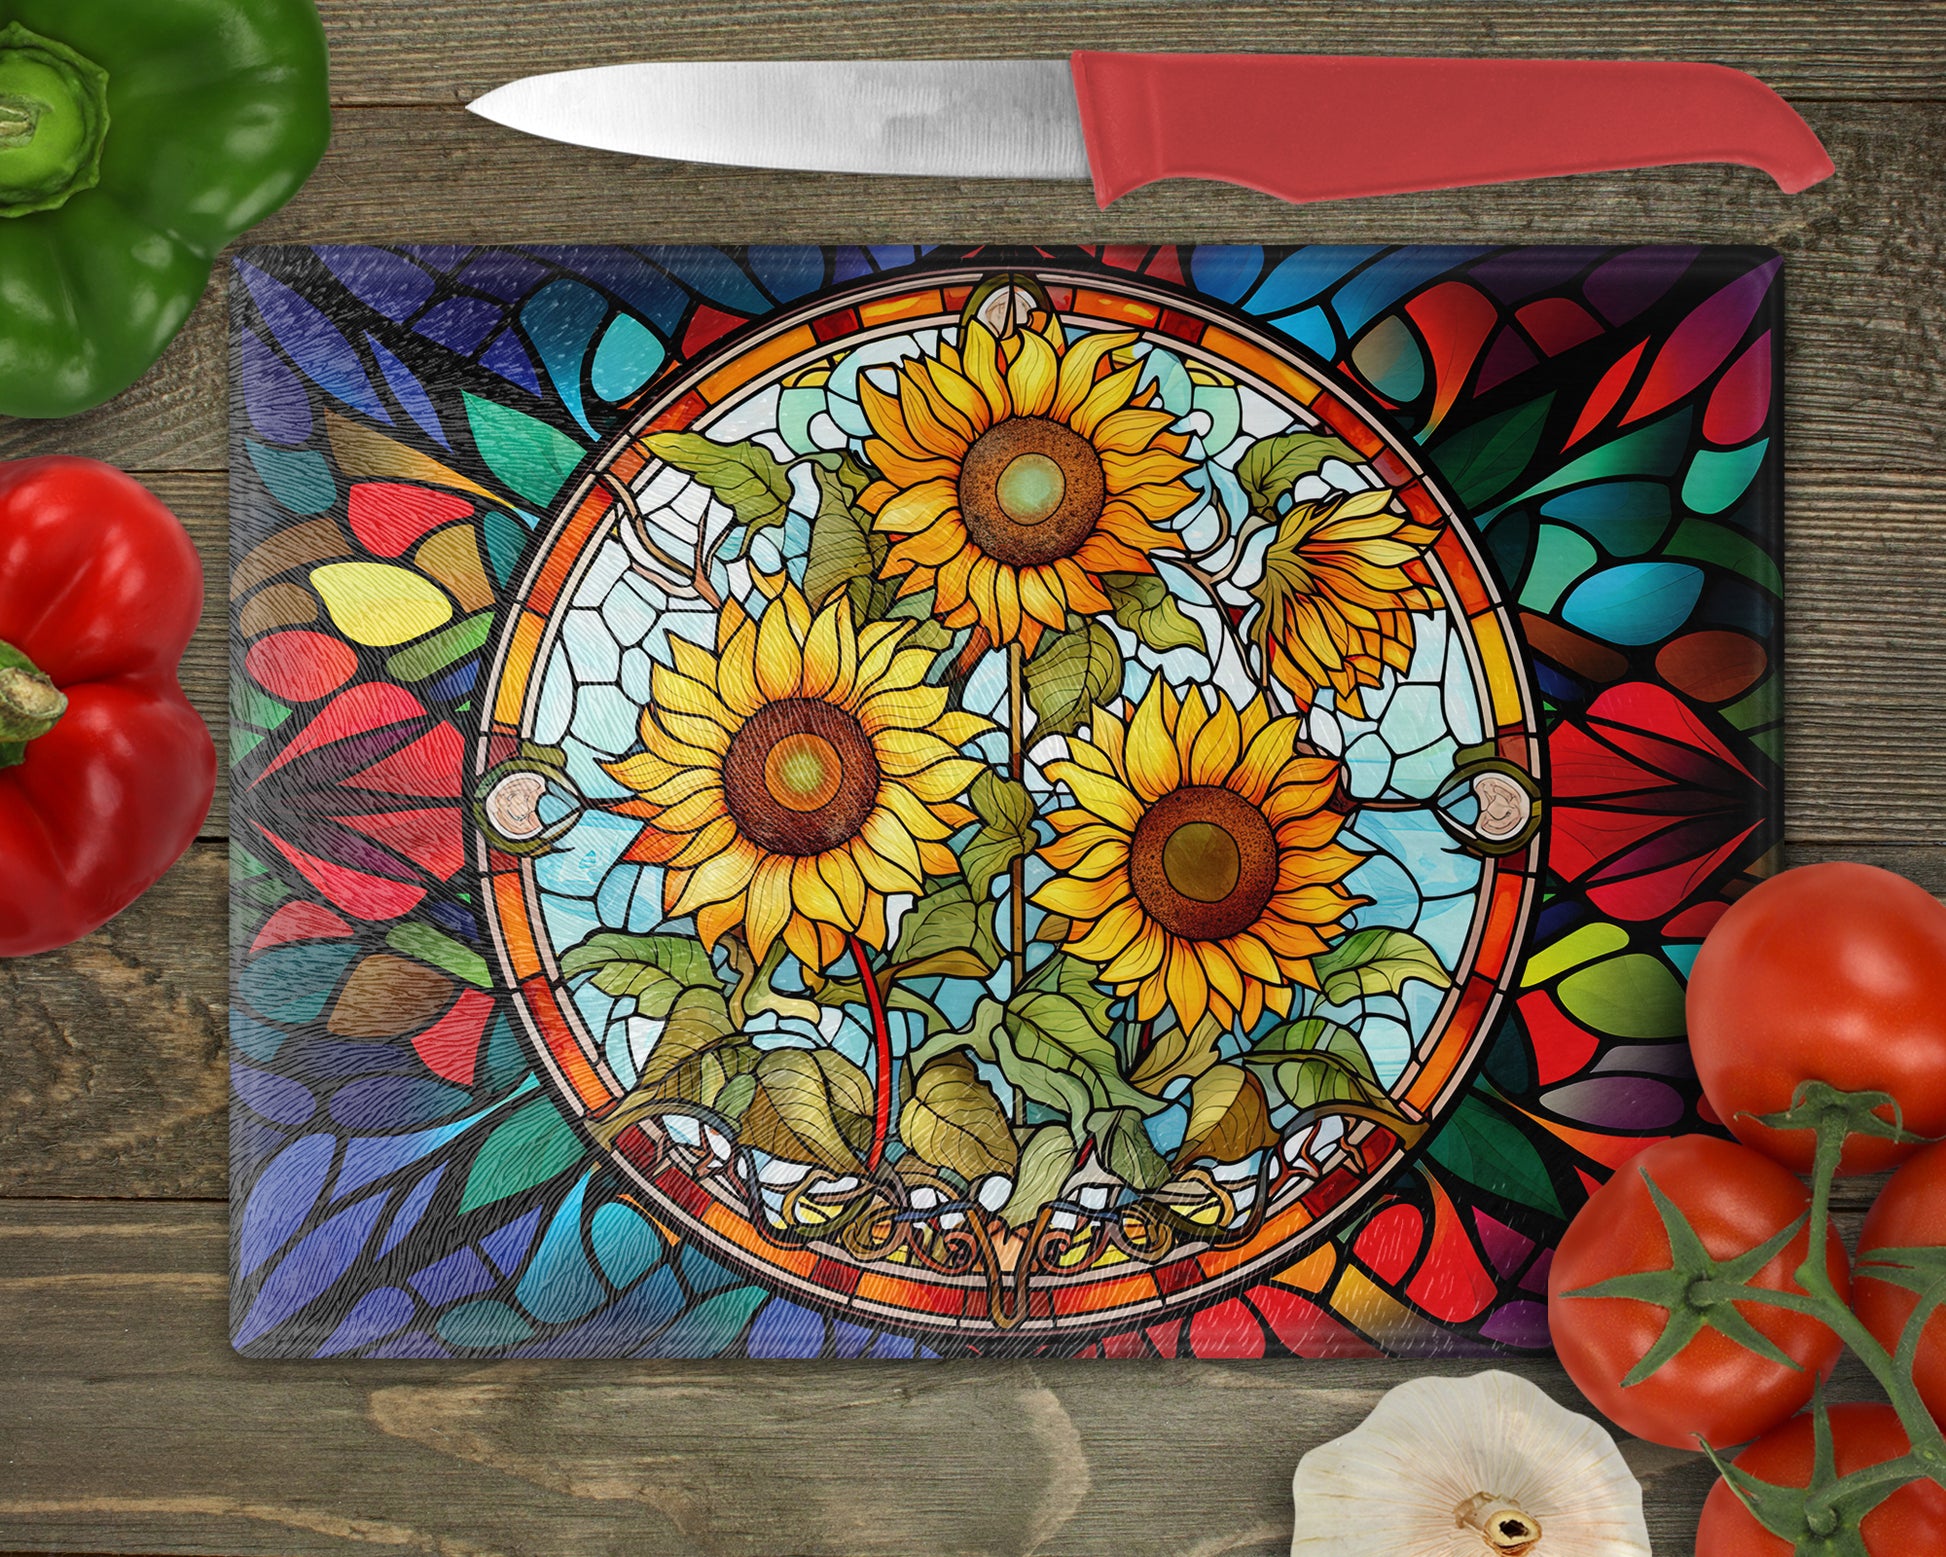 a cutting board with a painting of sunflowers on it